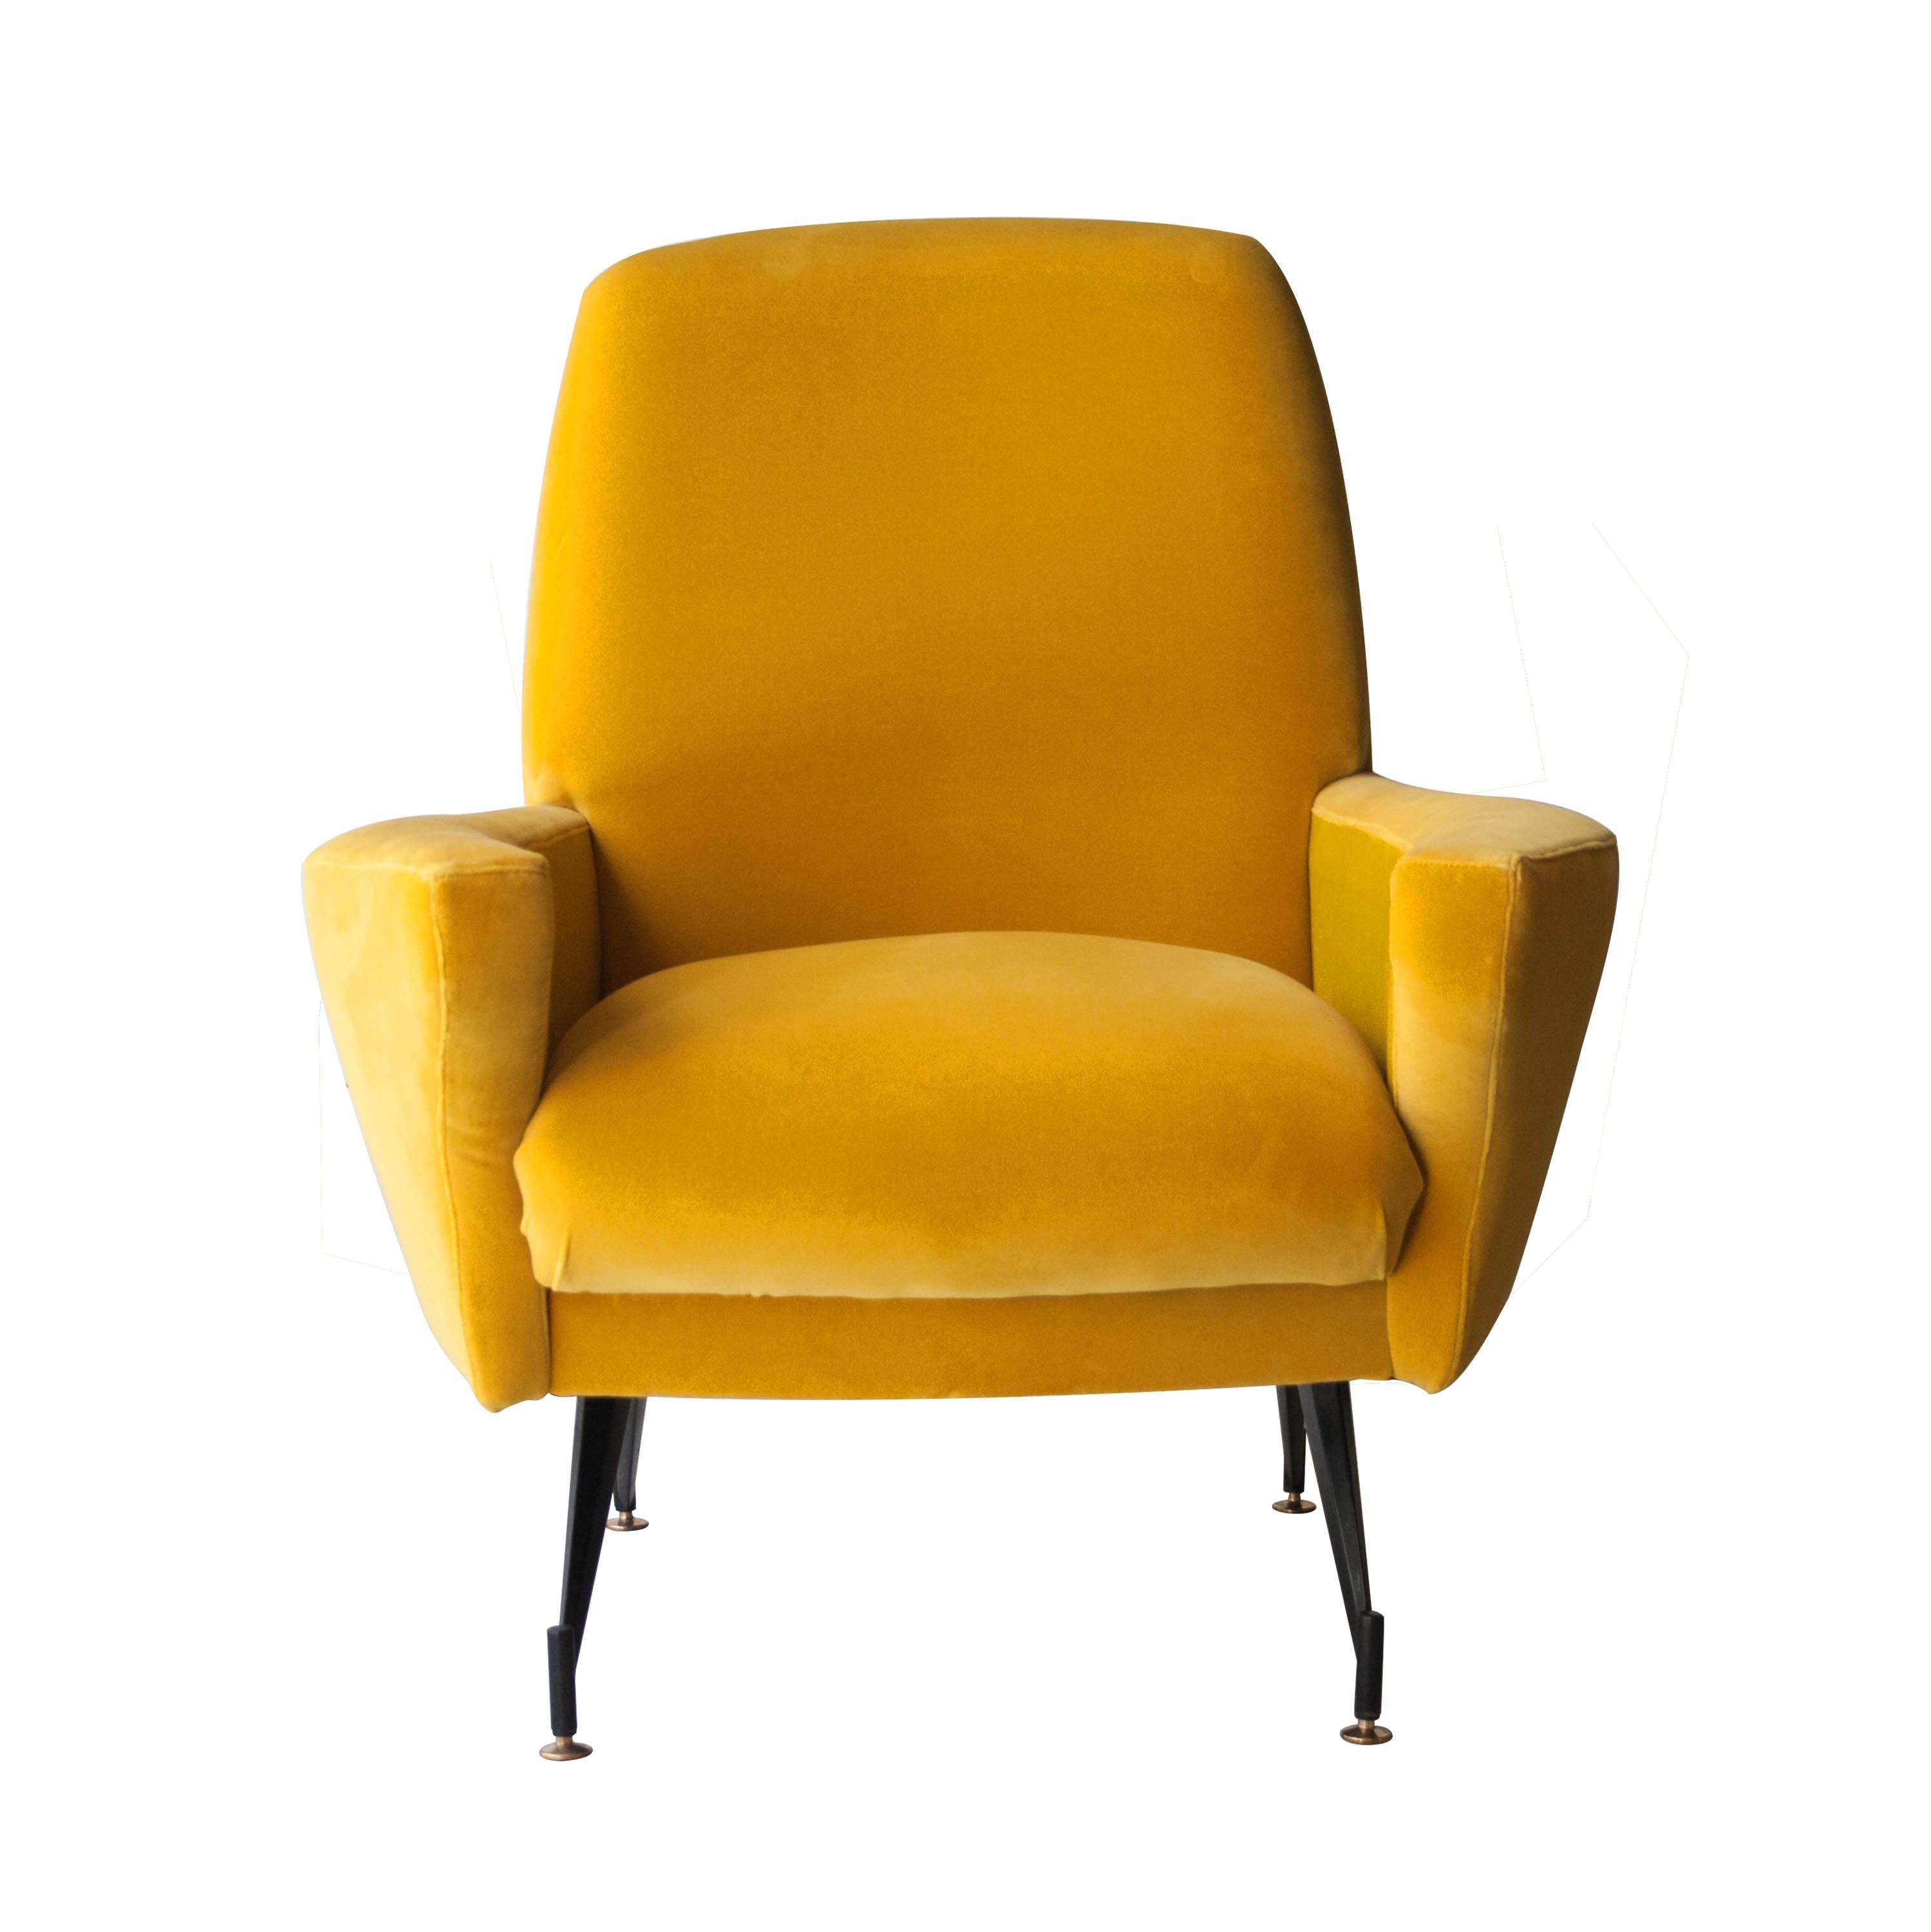 Pair of midcentury Italian armchairs made of solid wood structure with mustard yellow velvet upholstery, and black lacquered iron legs, finished with brass detail.